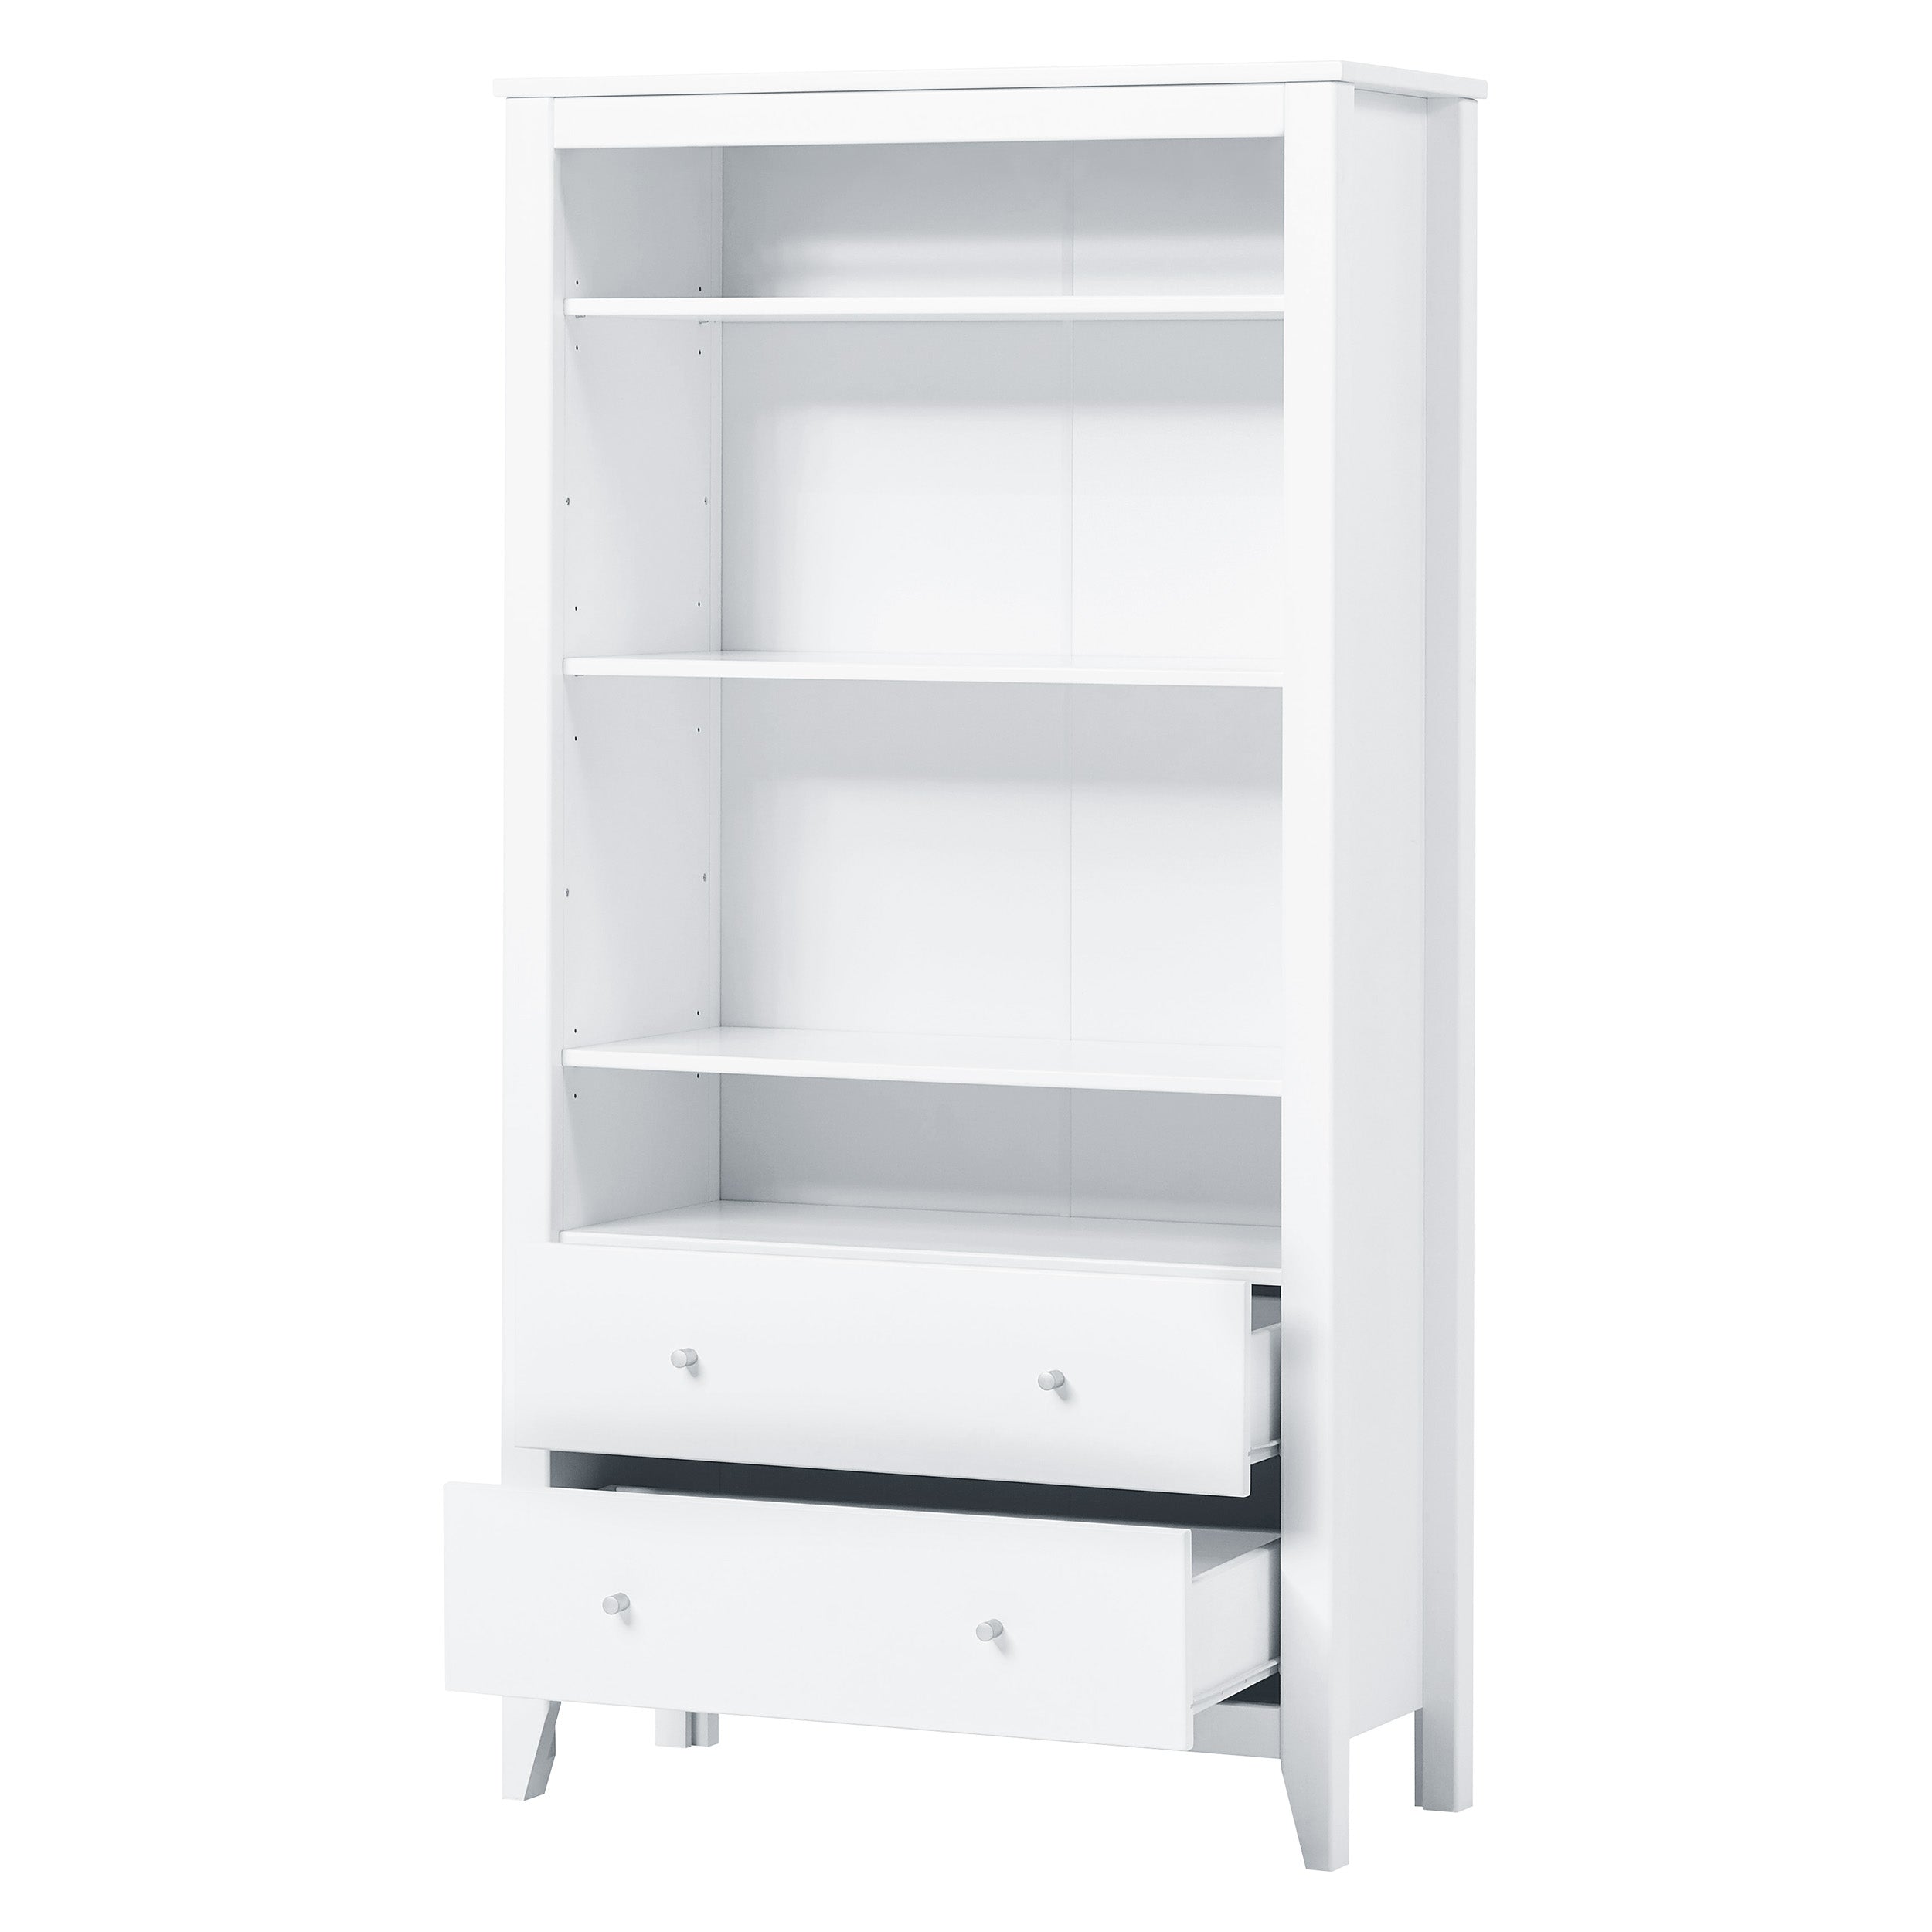 Hoppekids HANS Cabinet with 2 drawers, White